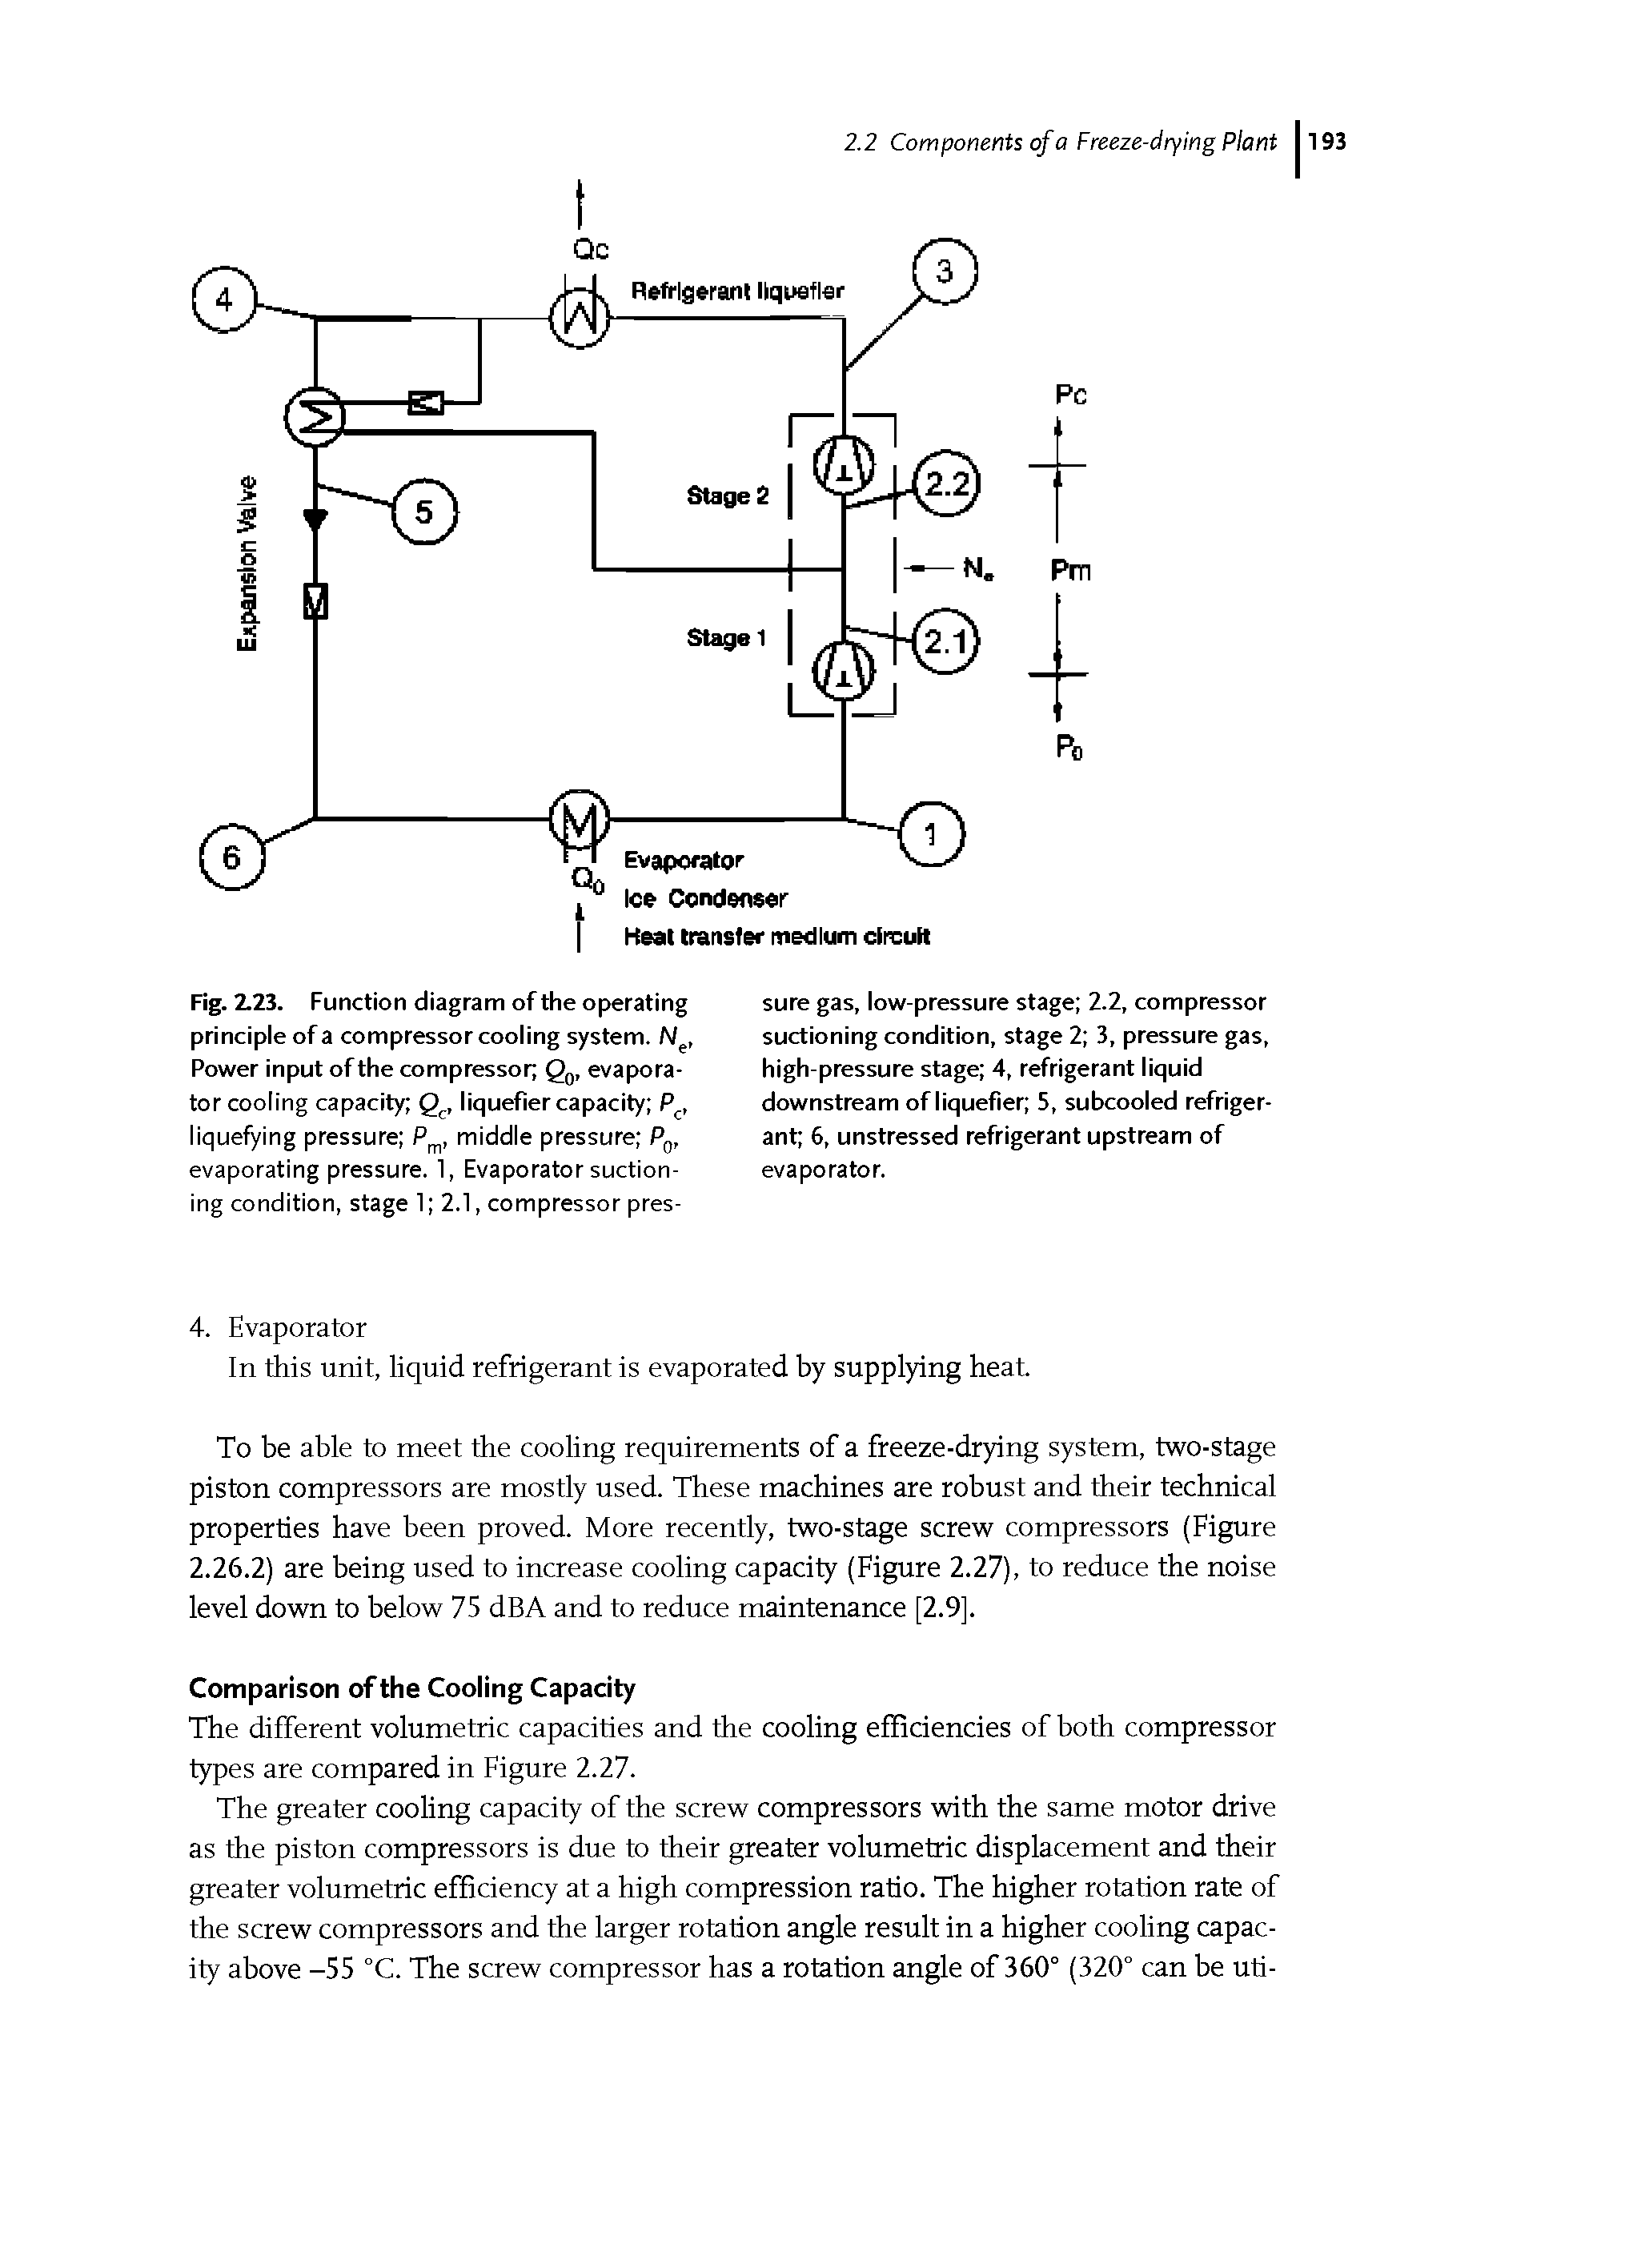 Fig. 2.23. Function diagram of the operating principle of a compressor cooling system. Ne, Power input of the compressor Q0, evaporator cooling capacity Qc, liquefier capacity P, liquefying pressure P, middle pressure P0, evaporating pressure. 1, Evaporator suctioning condition, stage 1 2.1, compressor pres-...